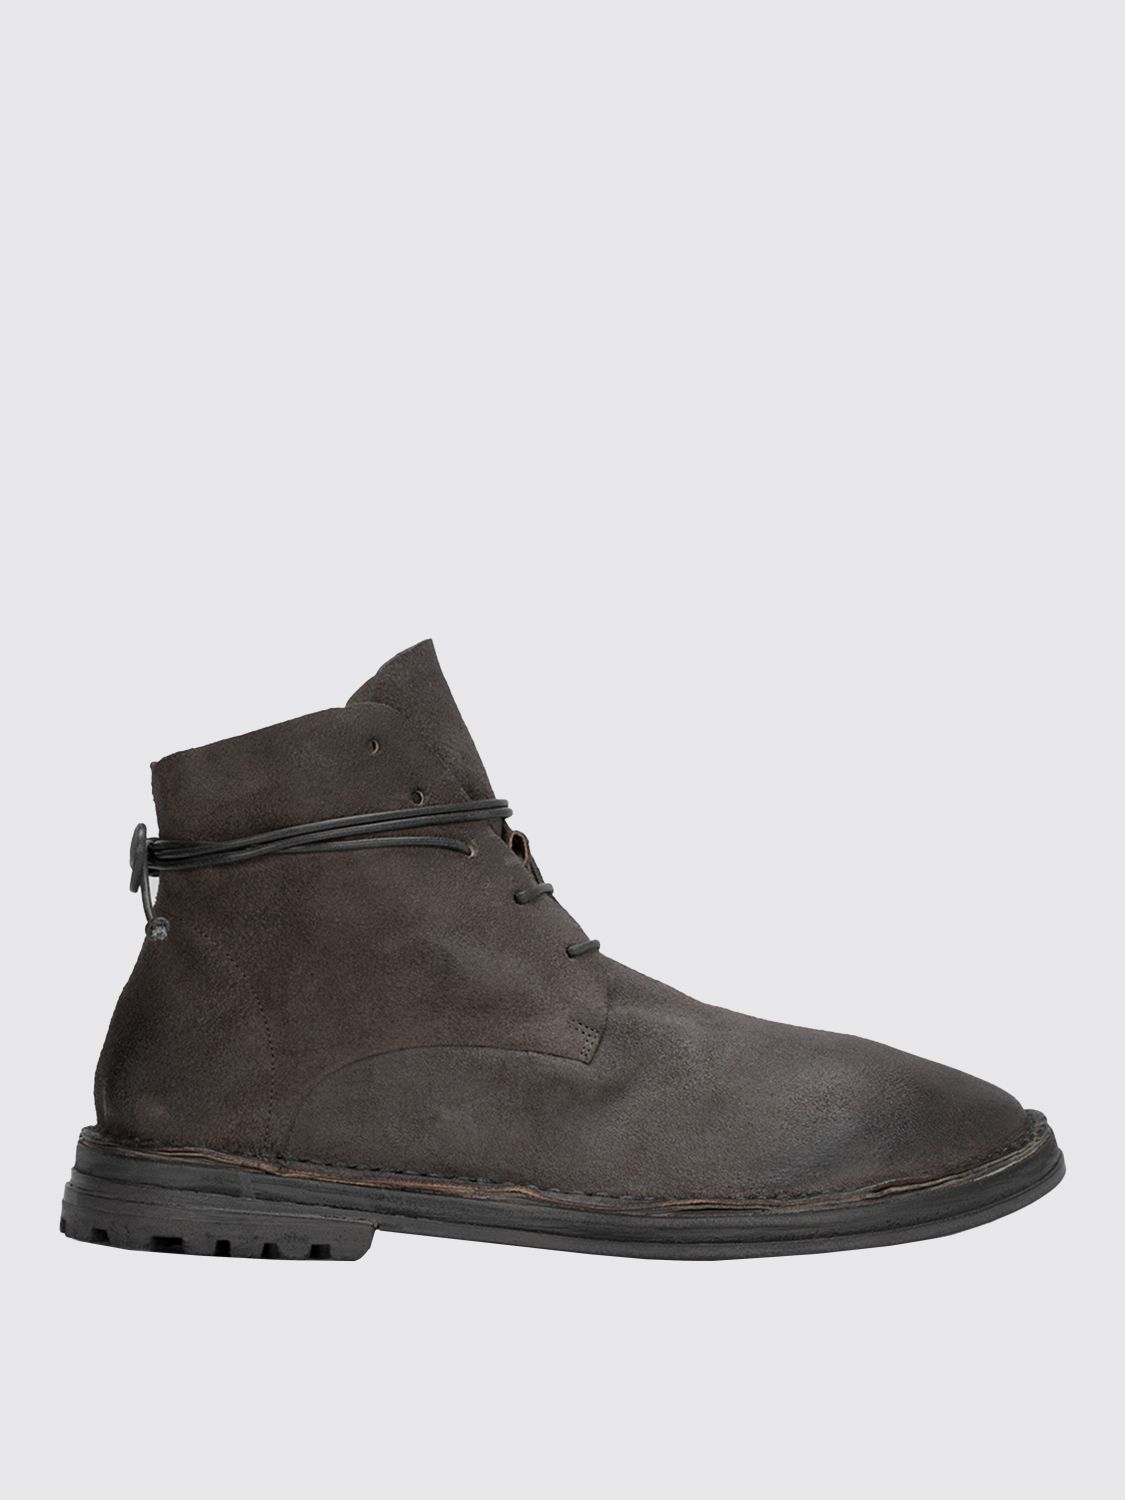 Marsèll Outlet: Boots men Marsell - Grey | Boots Marsèll MM2651210 ...